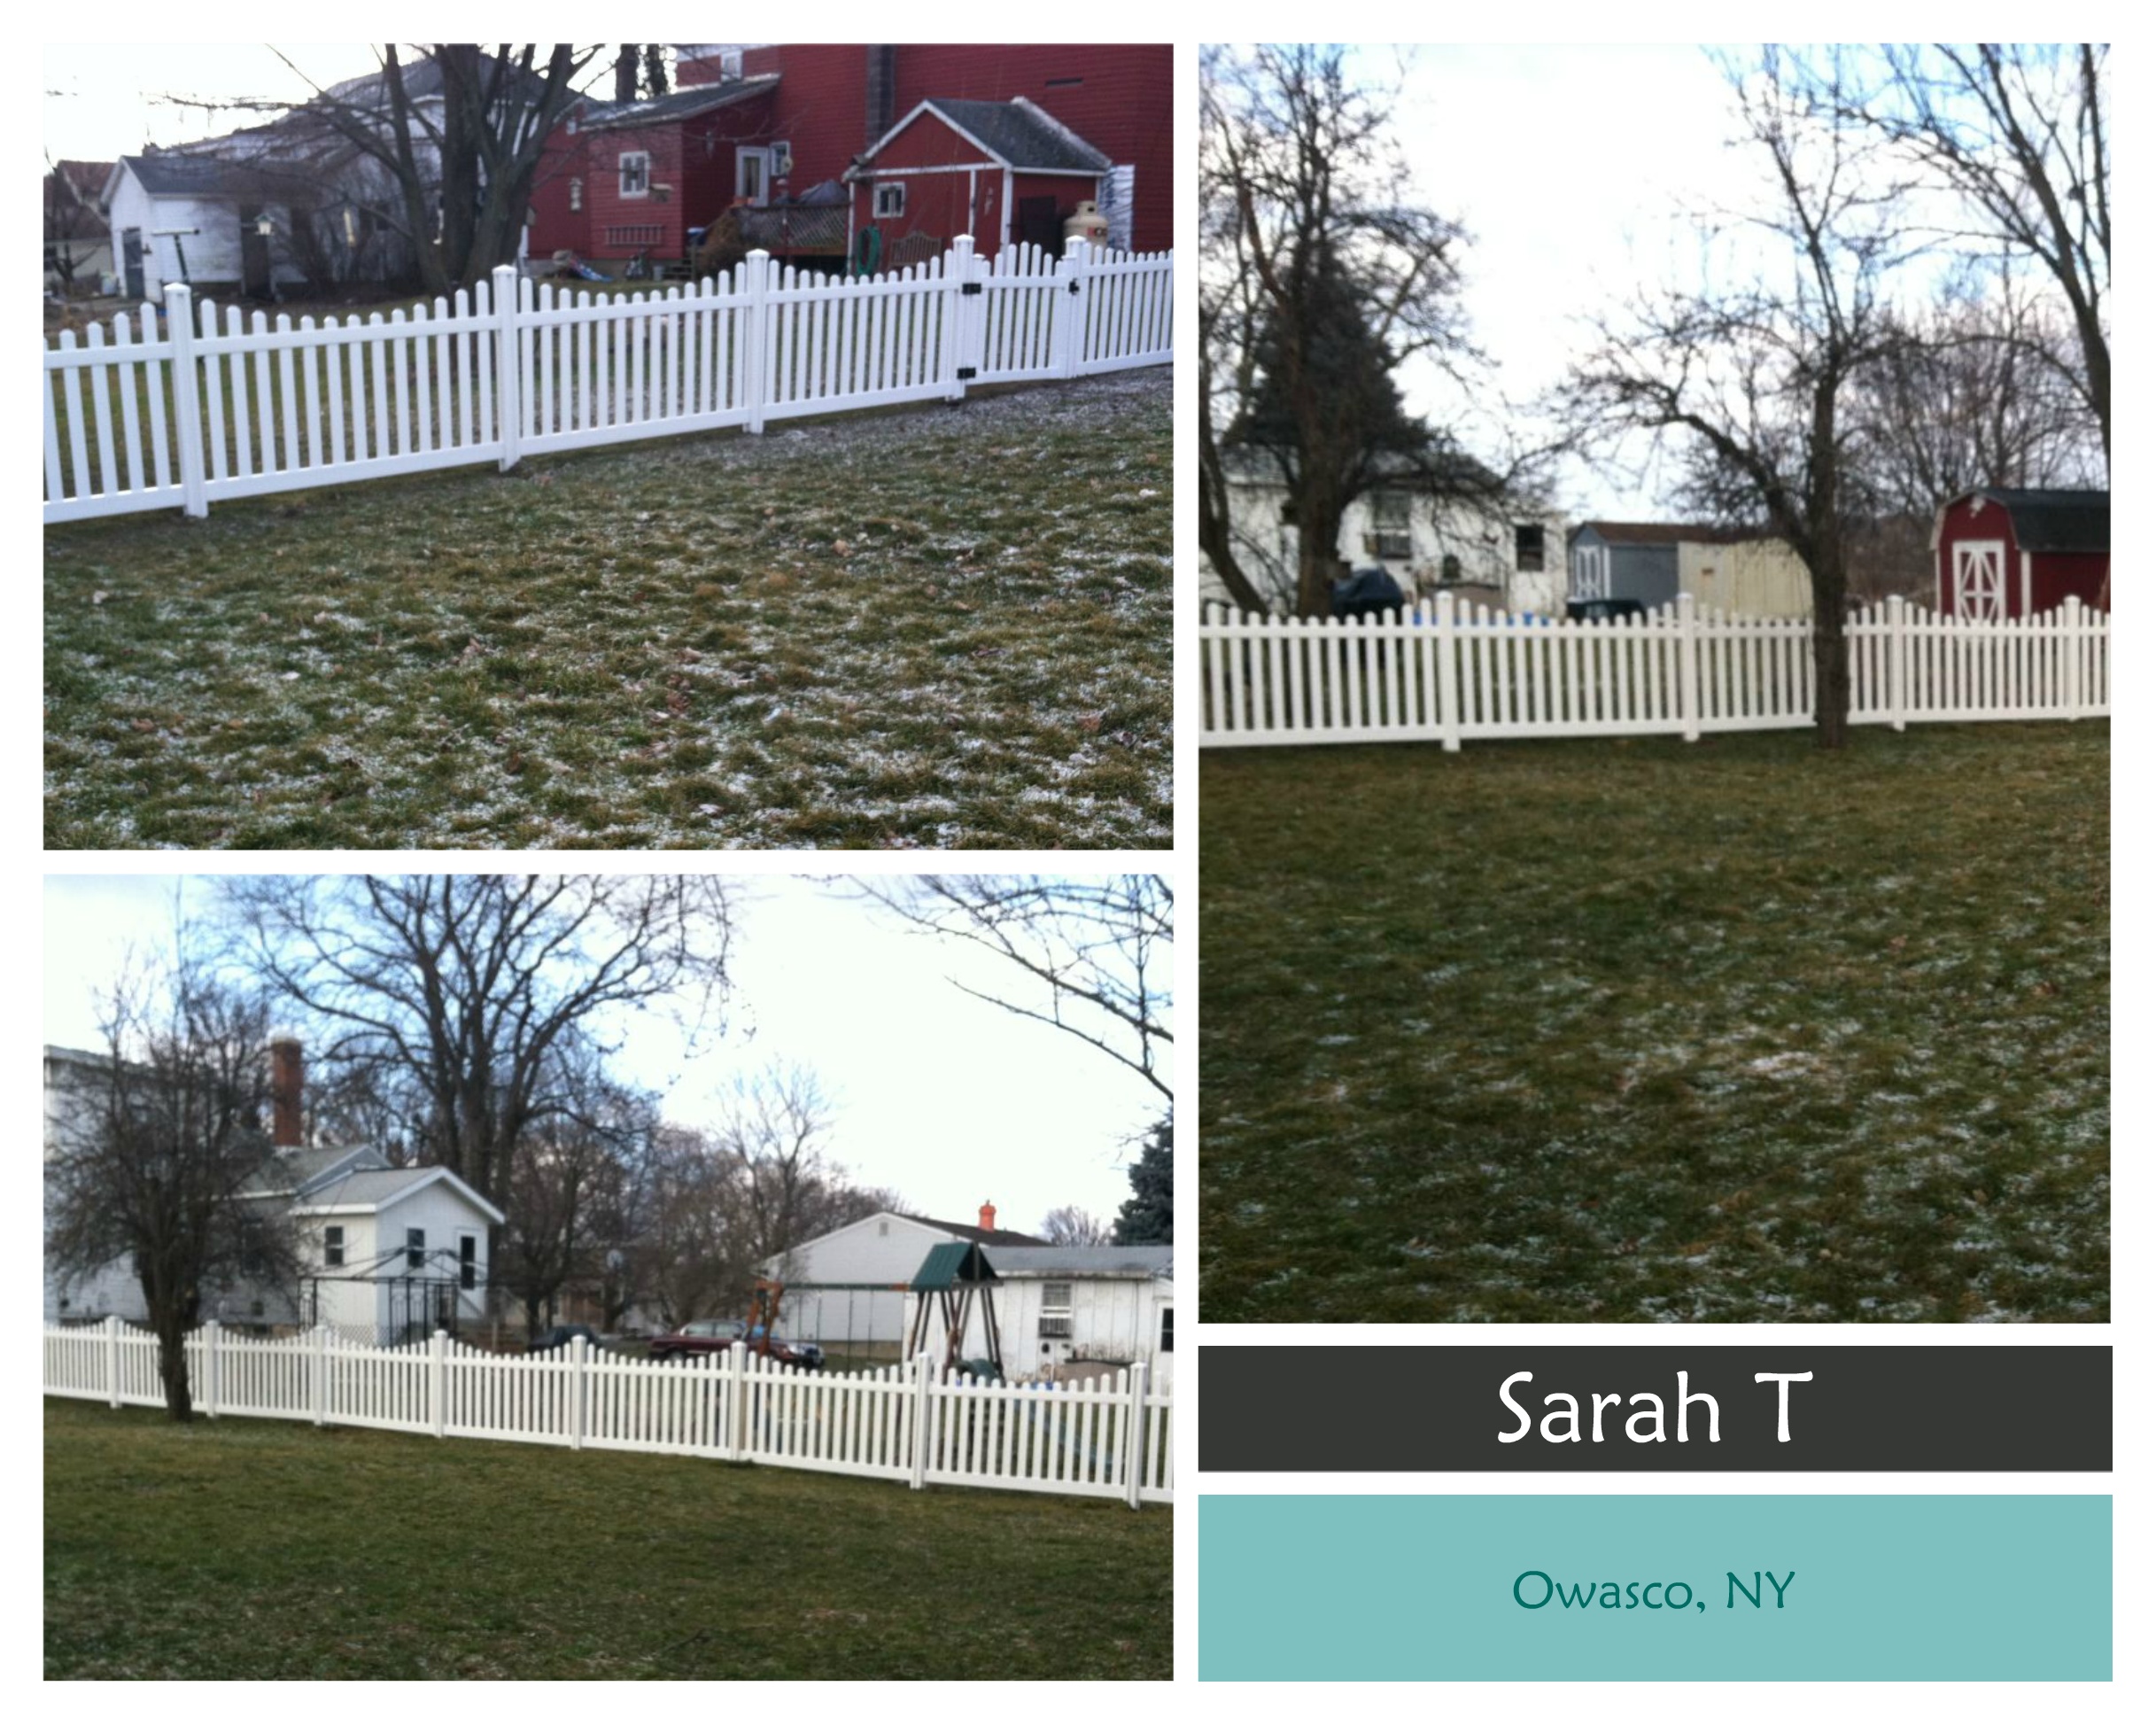 Sarah T in Owasco NY takes home second prize of $250 with 144 votes for her Jiminy Picket Vinyl Fence.